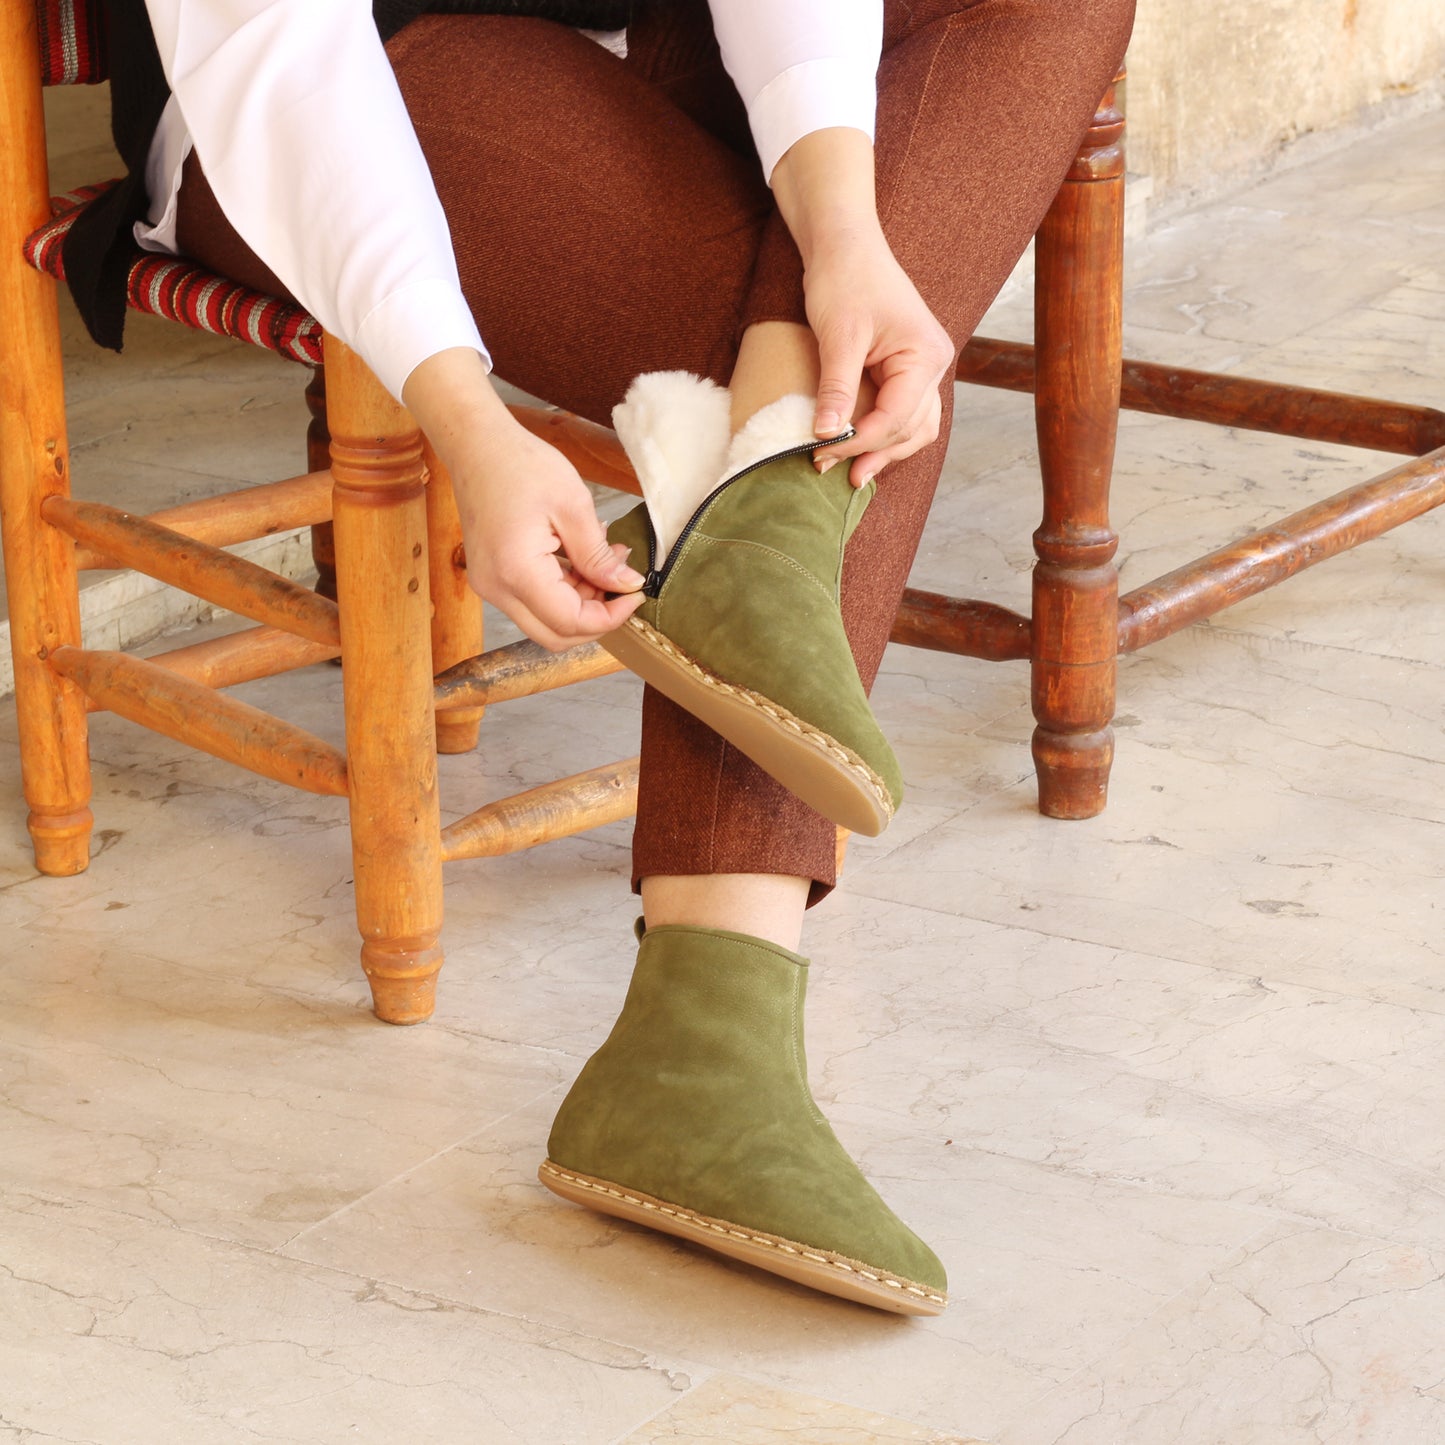 Shearling Barefoot Ankle Boots for Women - Handmade Green Nubuck Leather with Zero Drop Sole